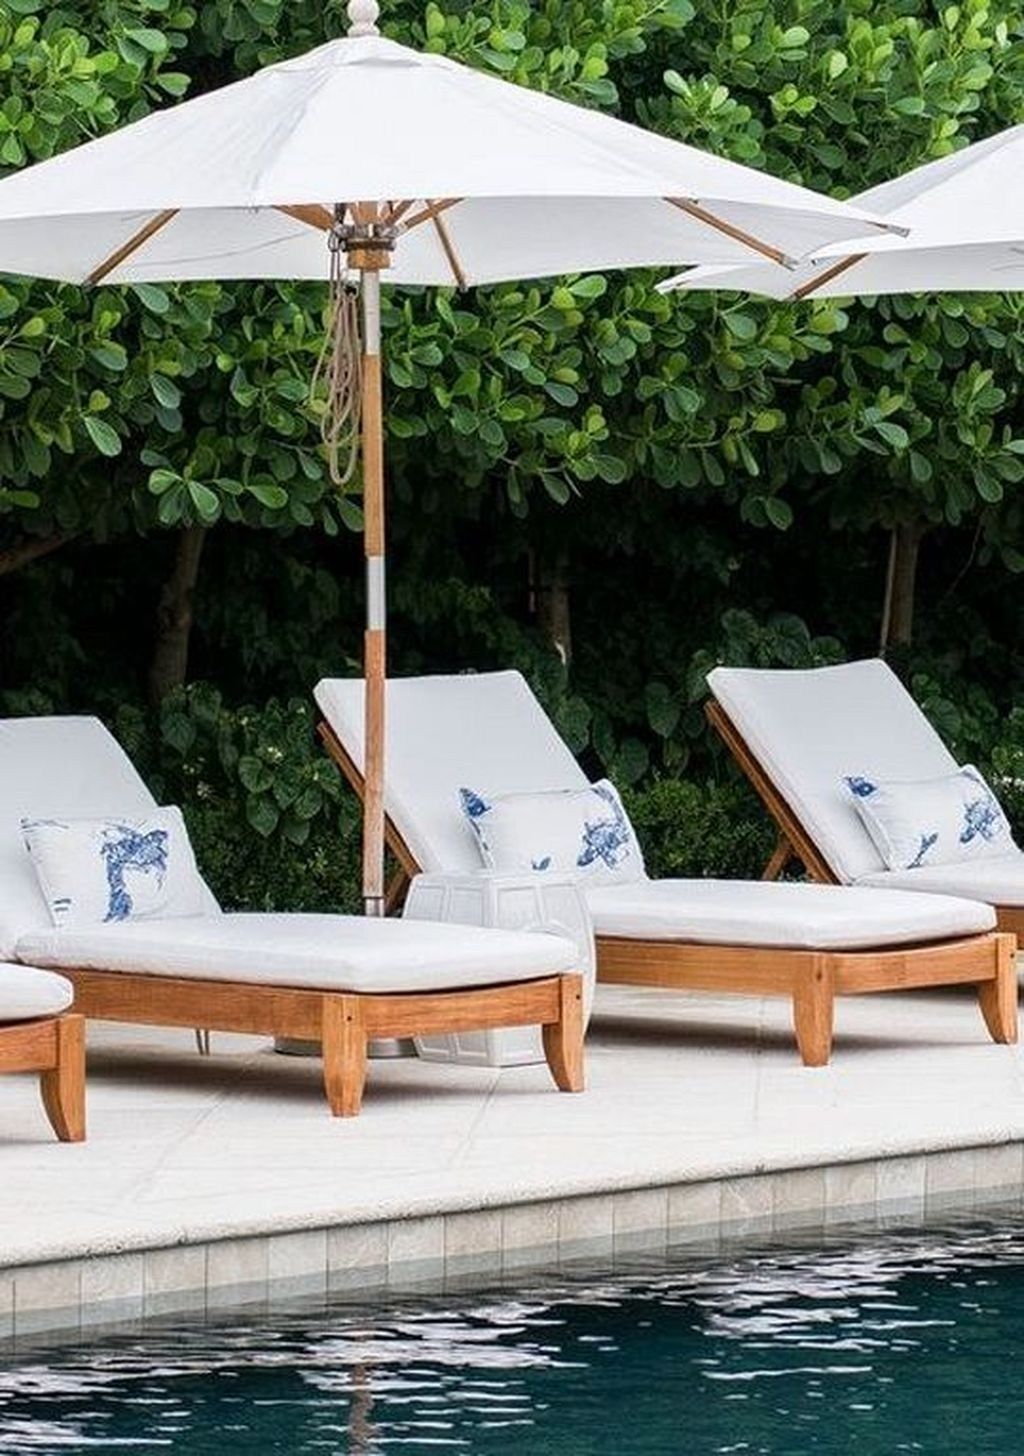 How to Enjoy Fresh Air with Classy Patio Lounge Chairs